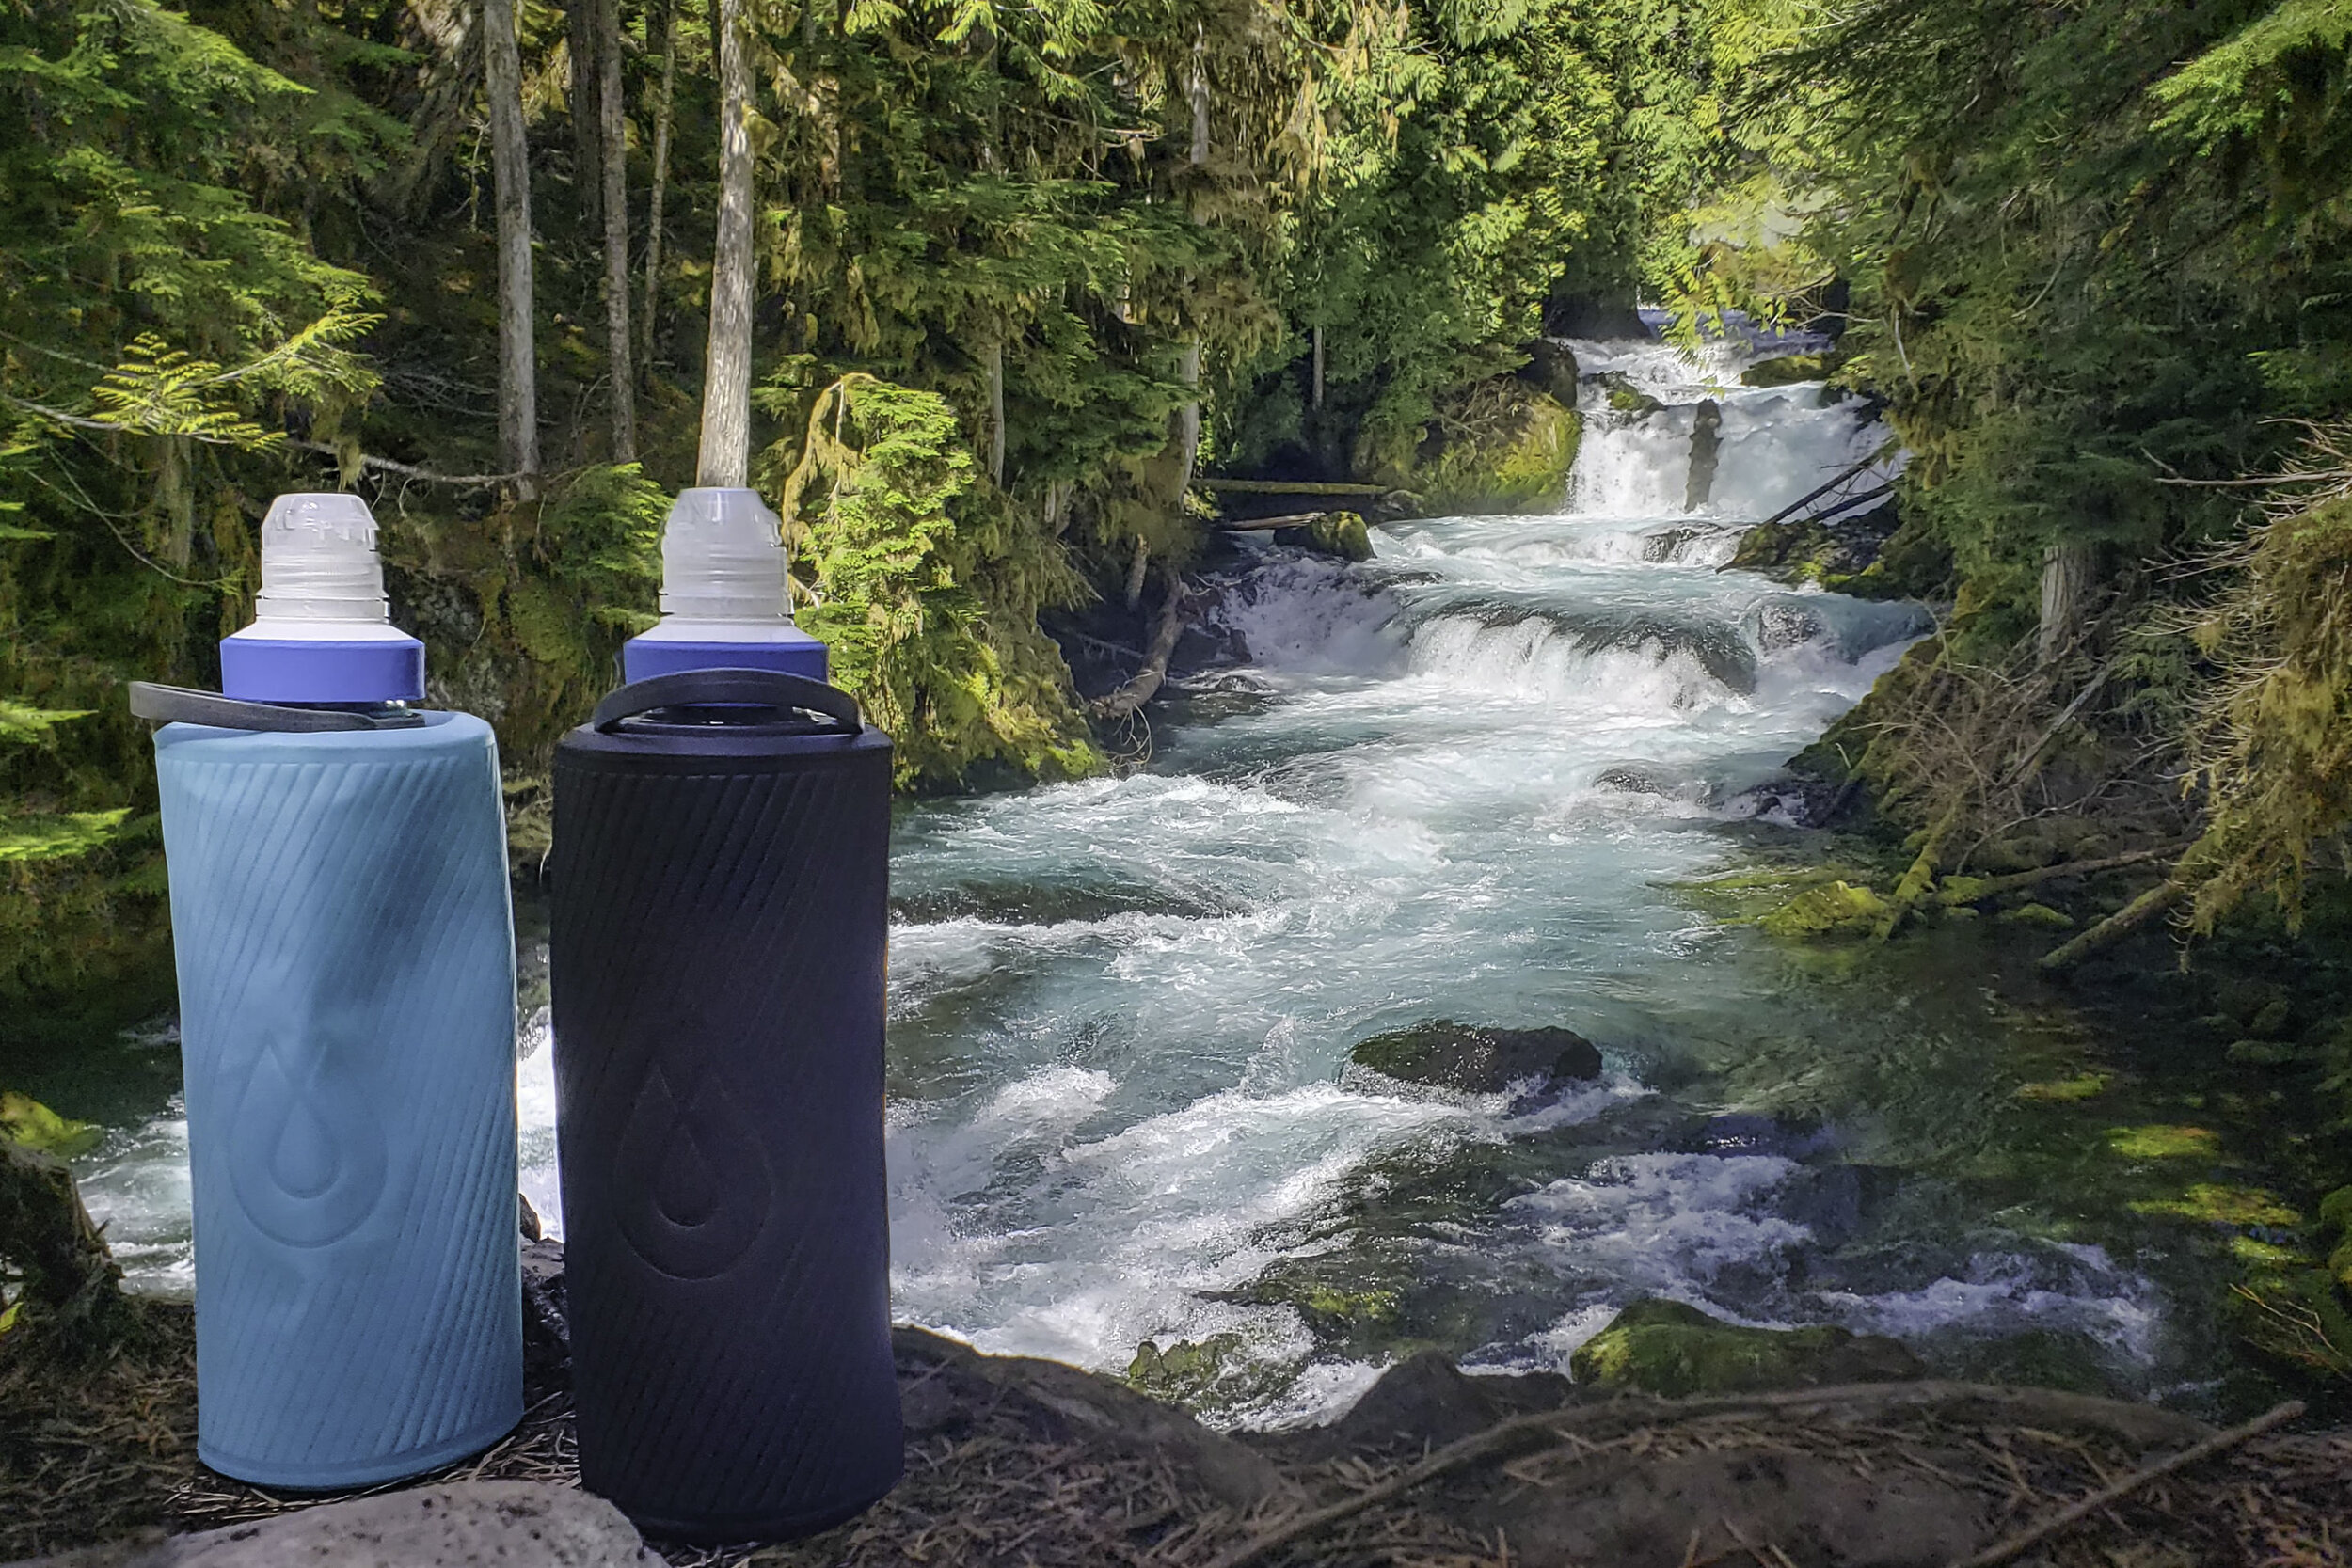 A Katadyn BeFree Filter & Hydrapak Flux Bottle are the perfect fast/easy filtration system when water is abundant.